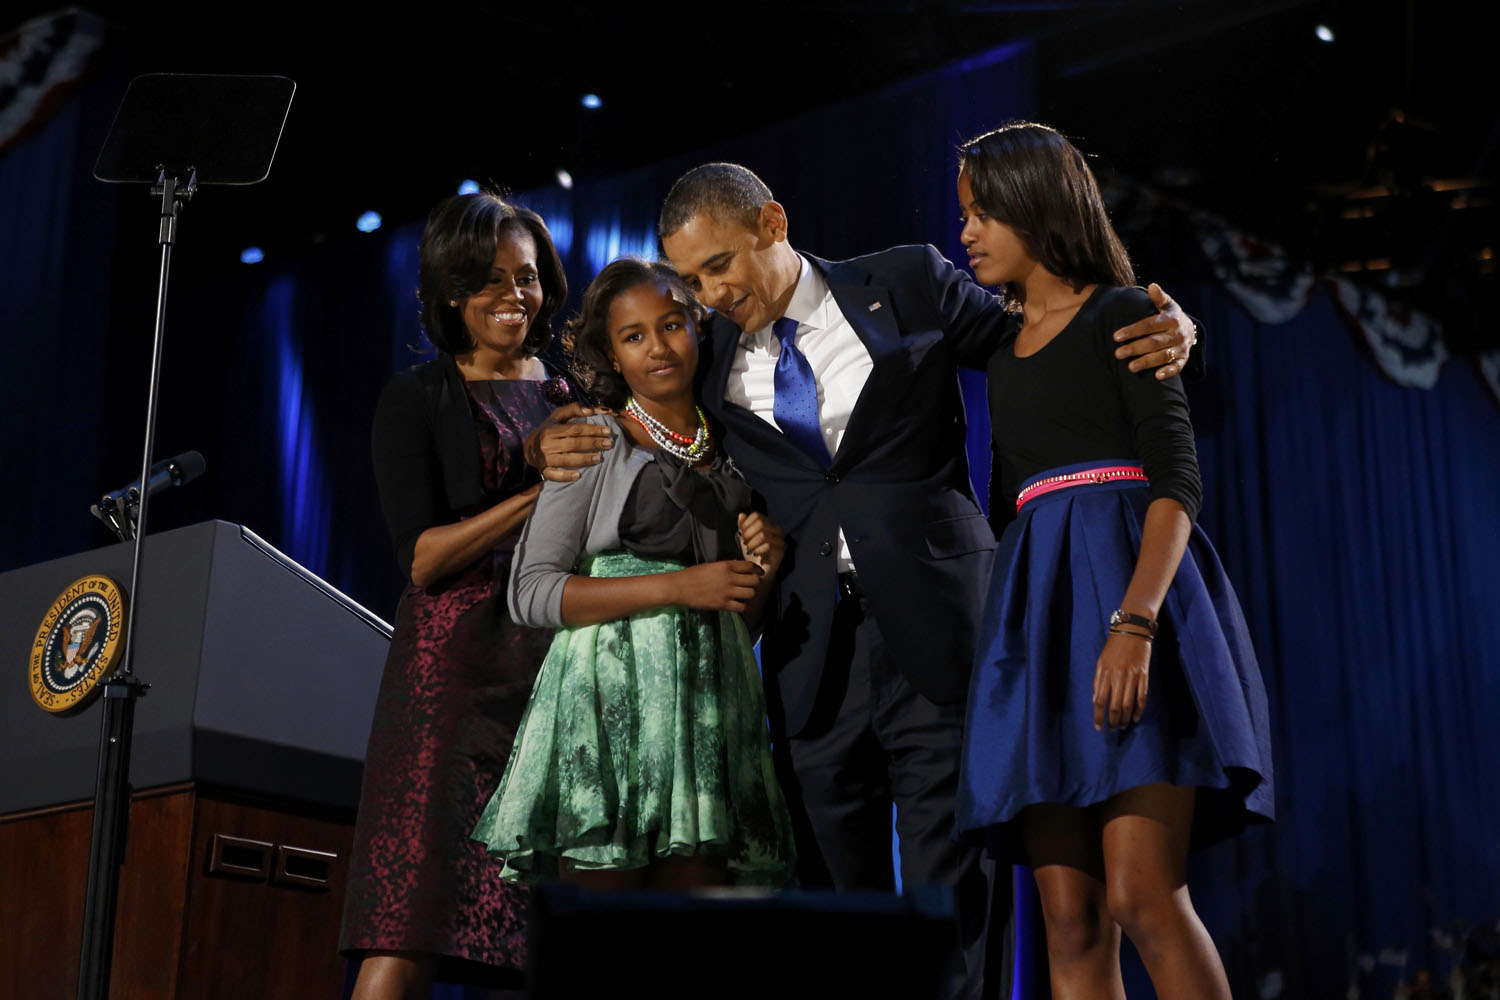 Image: Nov. 7, 2012. President Obama celebrates with first lady Michelle Obama and their daughters Malia and Sasha at their election night victory rally in Chicago.